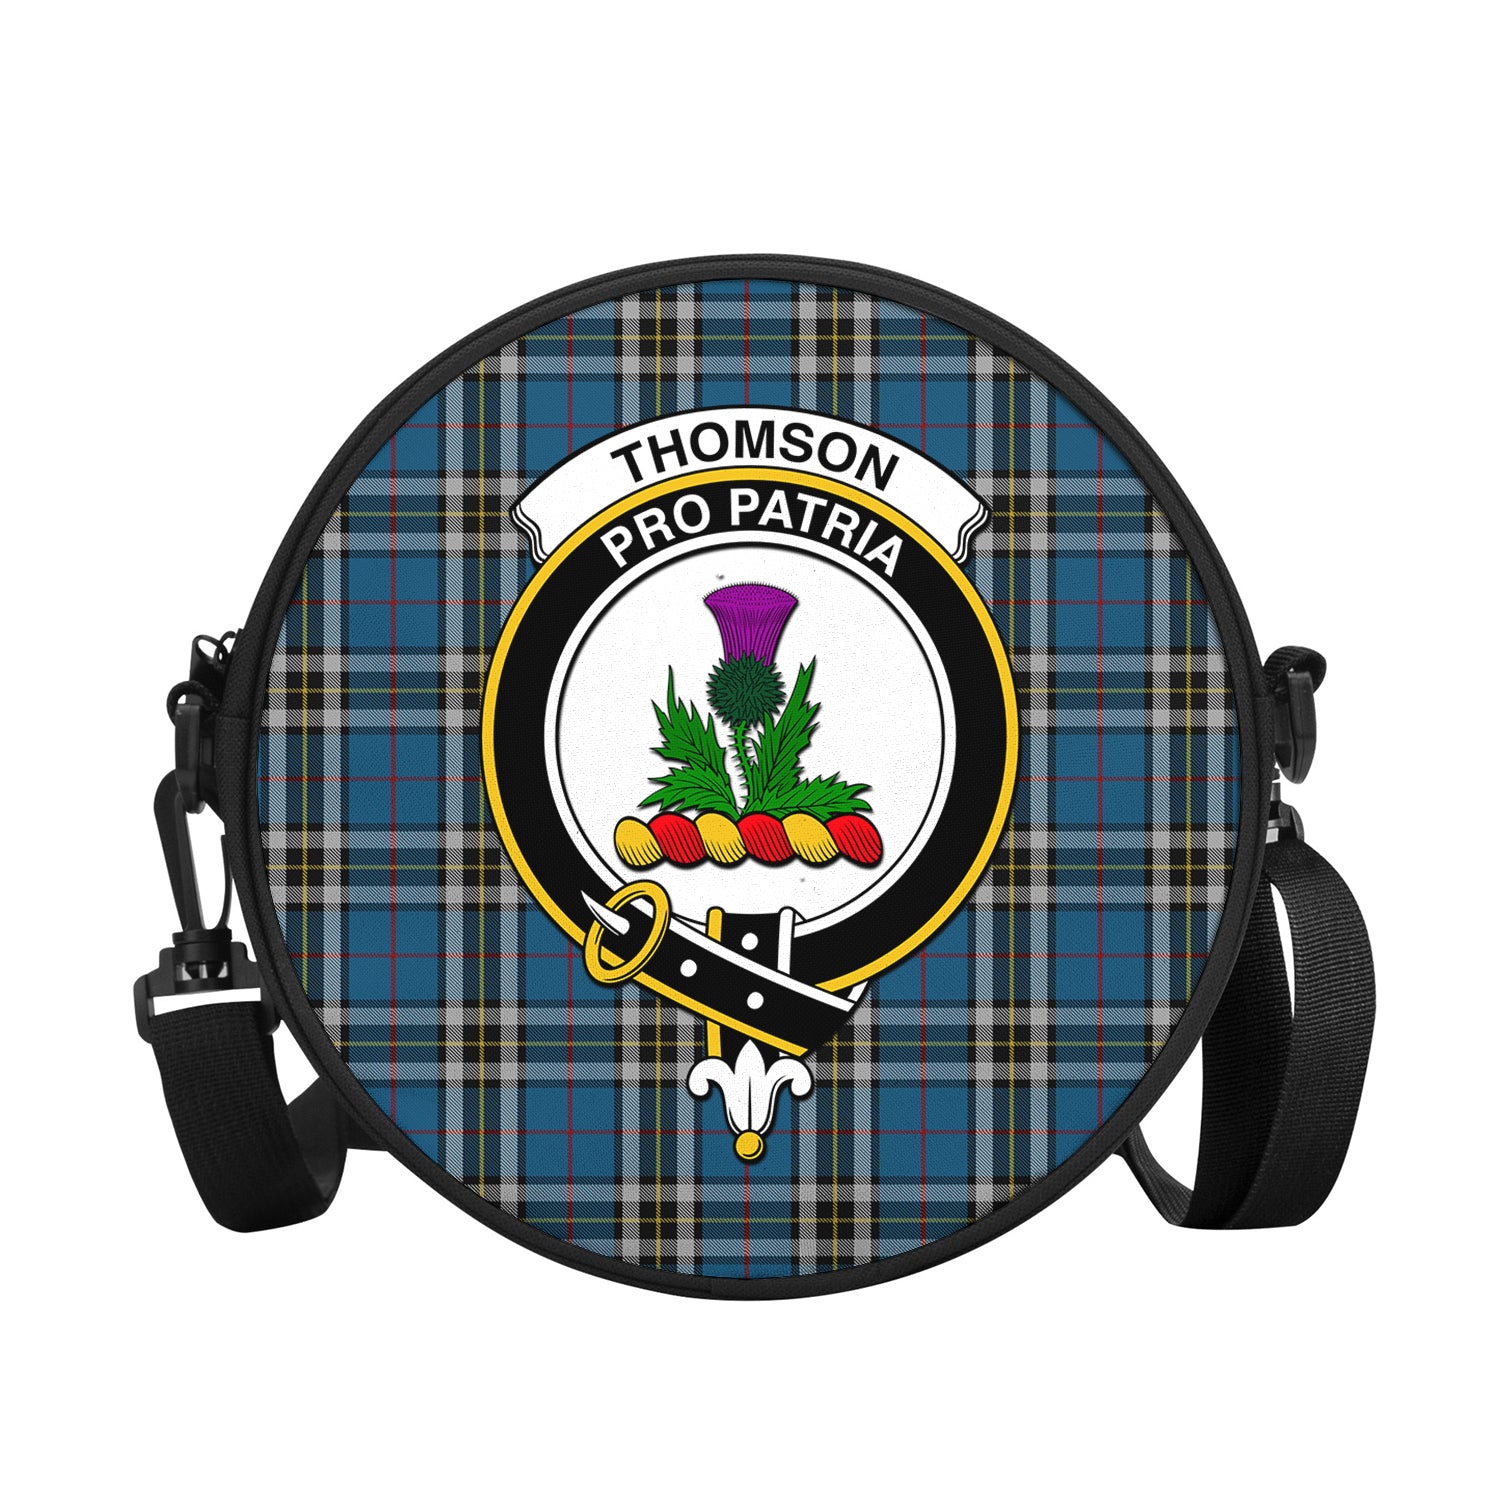 thomson-dress-blue-tartan-round-satchel-bags-with-family-crest